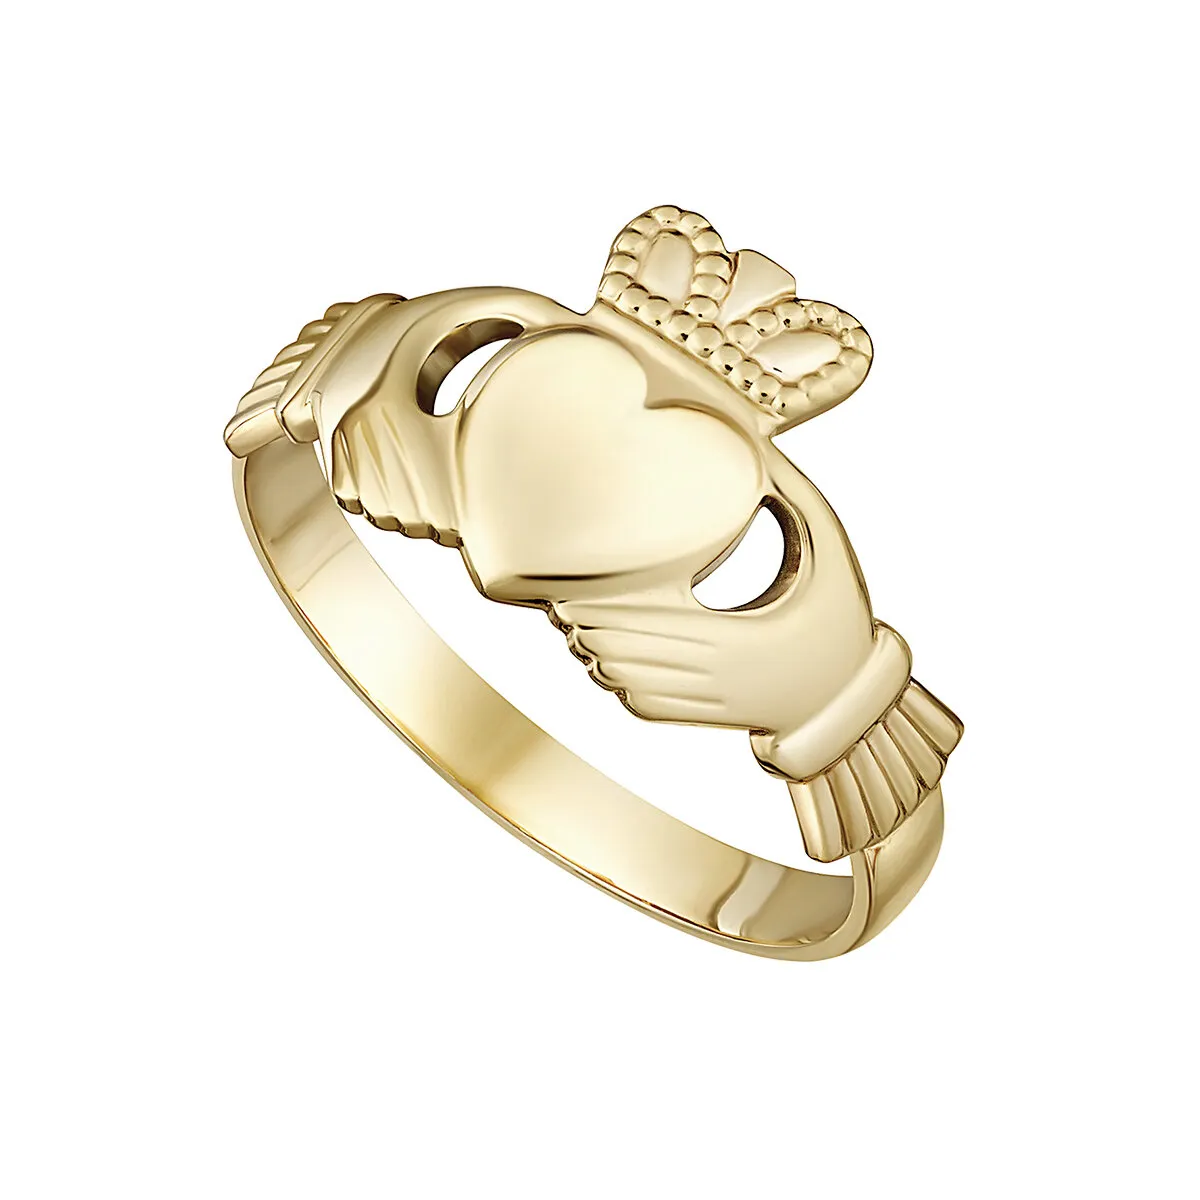 10k Gold Maids Claddagh Ring...